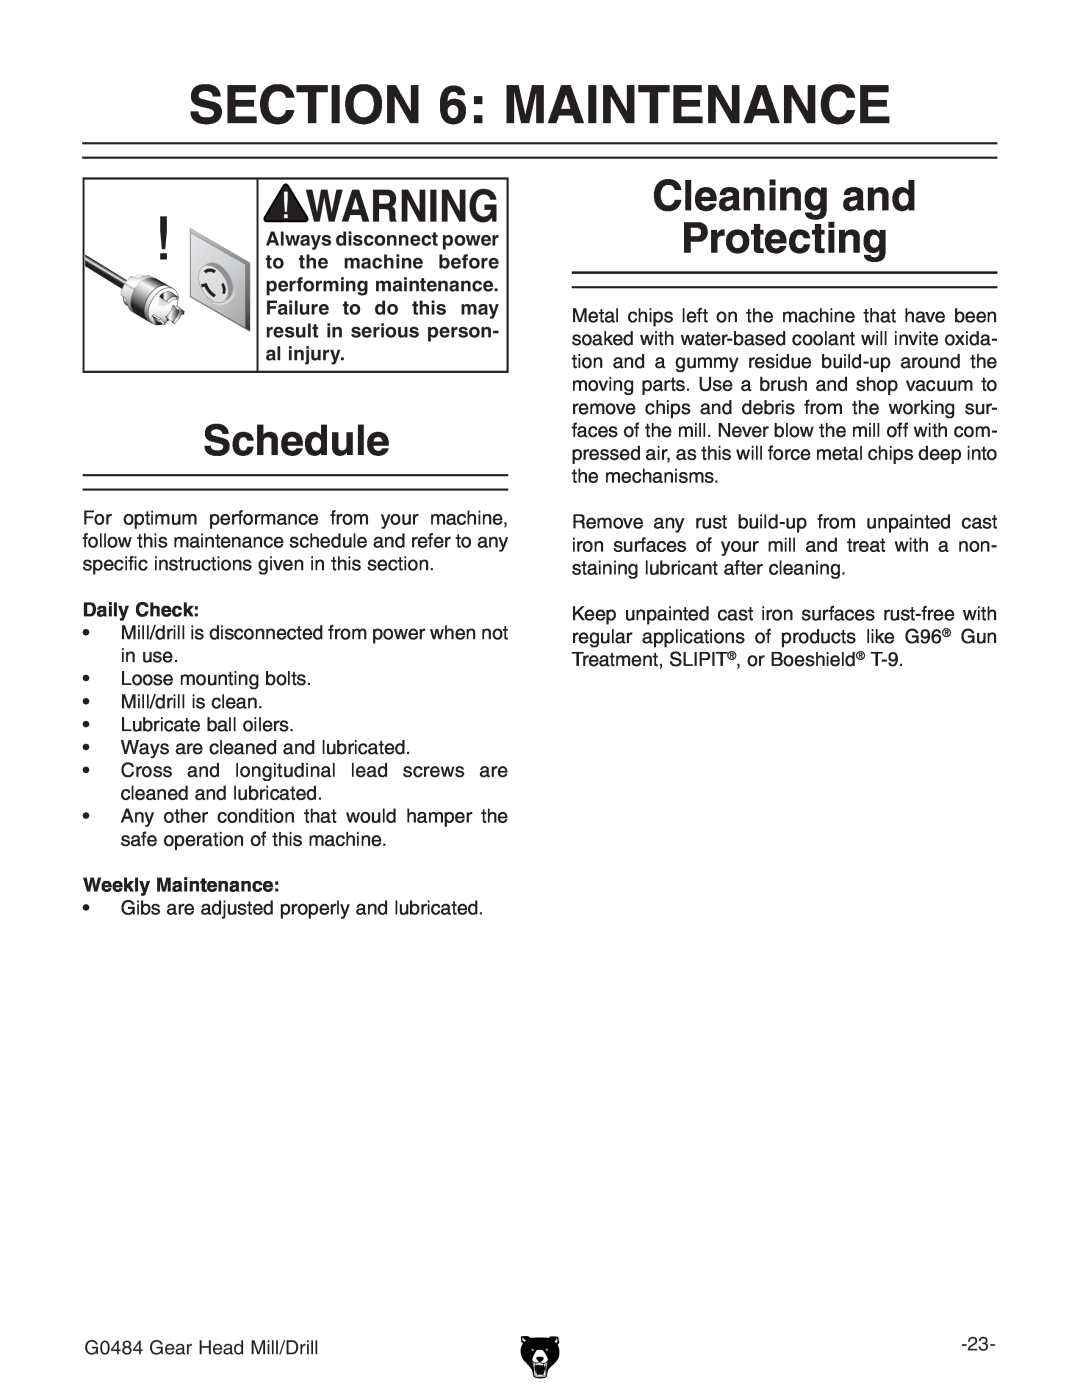 Grizzly G0484 owner manual Maintenance, Schedule, Cleaning and Protecting 